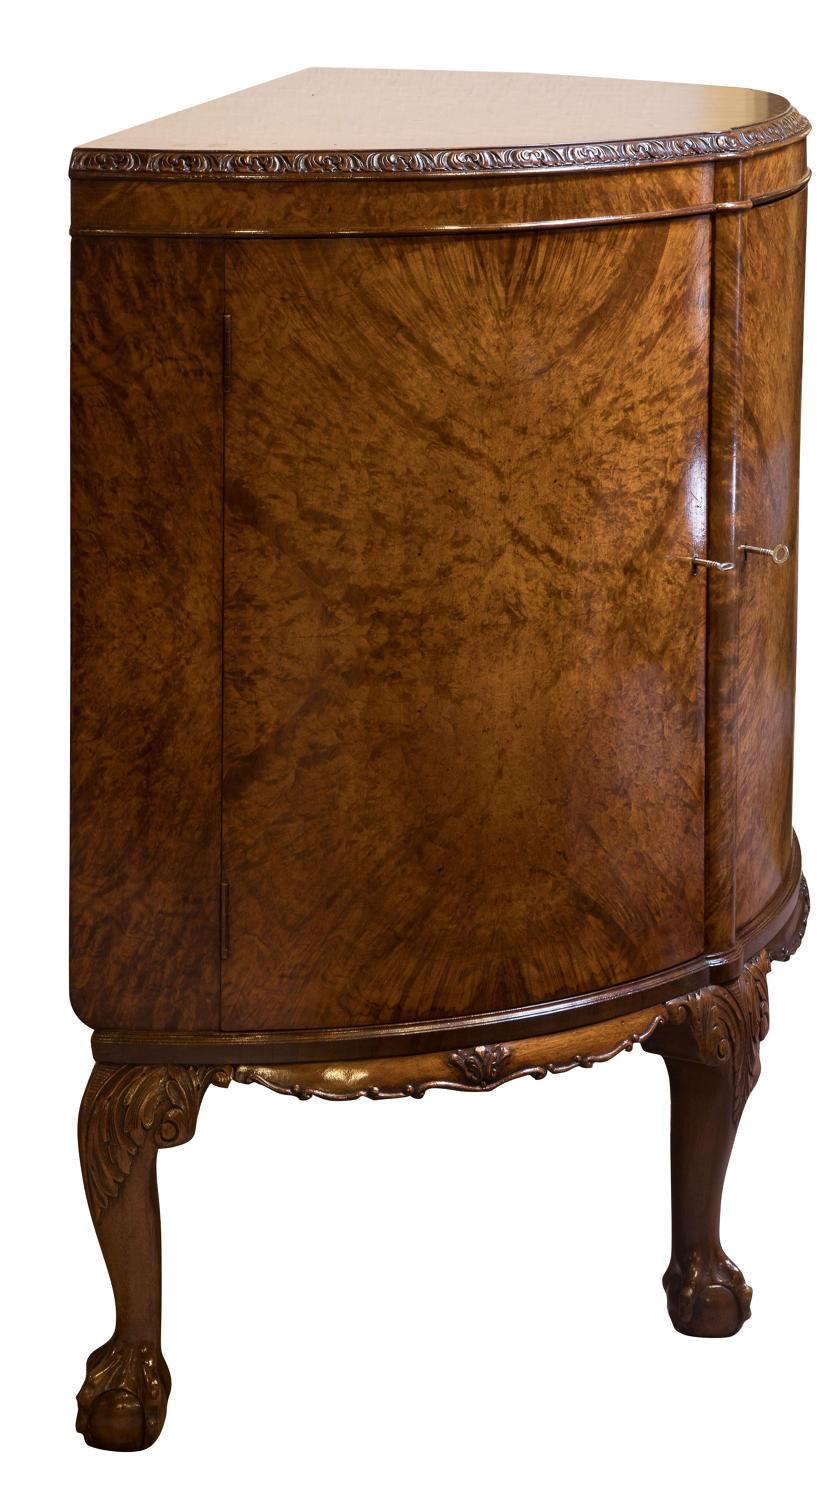 Burr walnut demilune cabinet by Waring & Gillow

circa 1930.